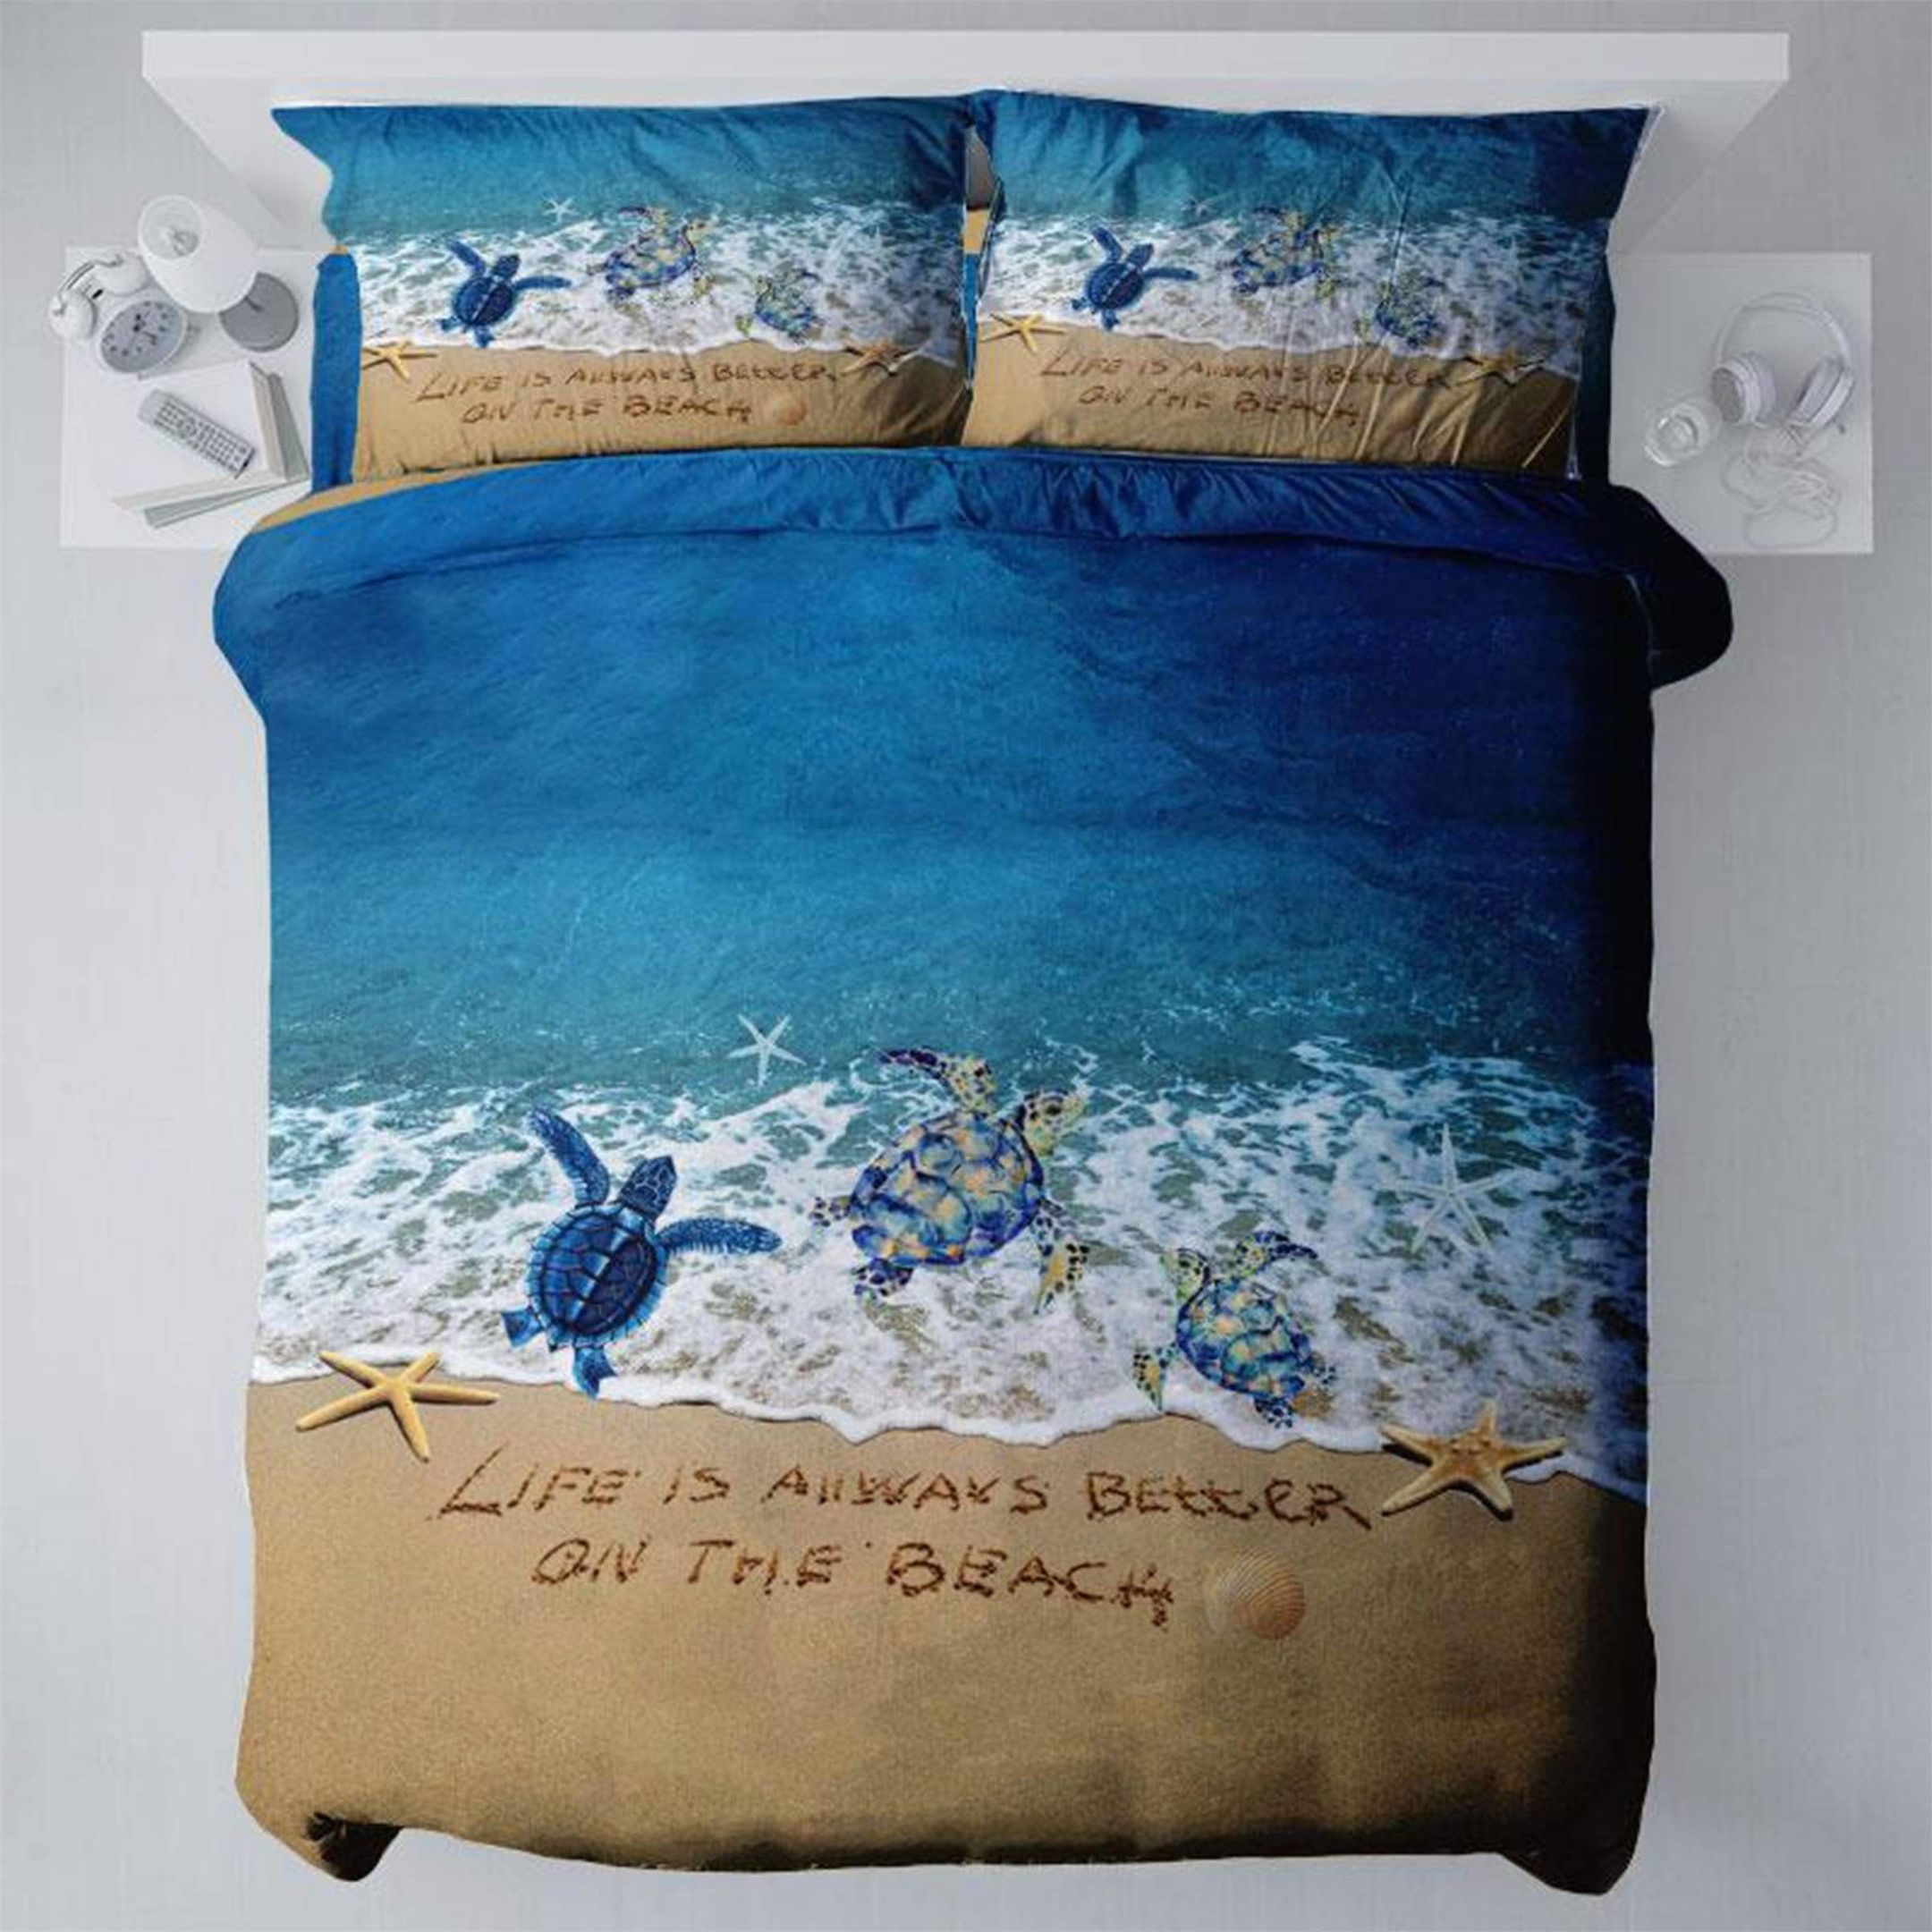 Life Is Always Better On The Beach Sea Turtle Duvet Cover Bedding Set